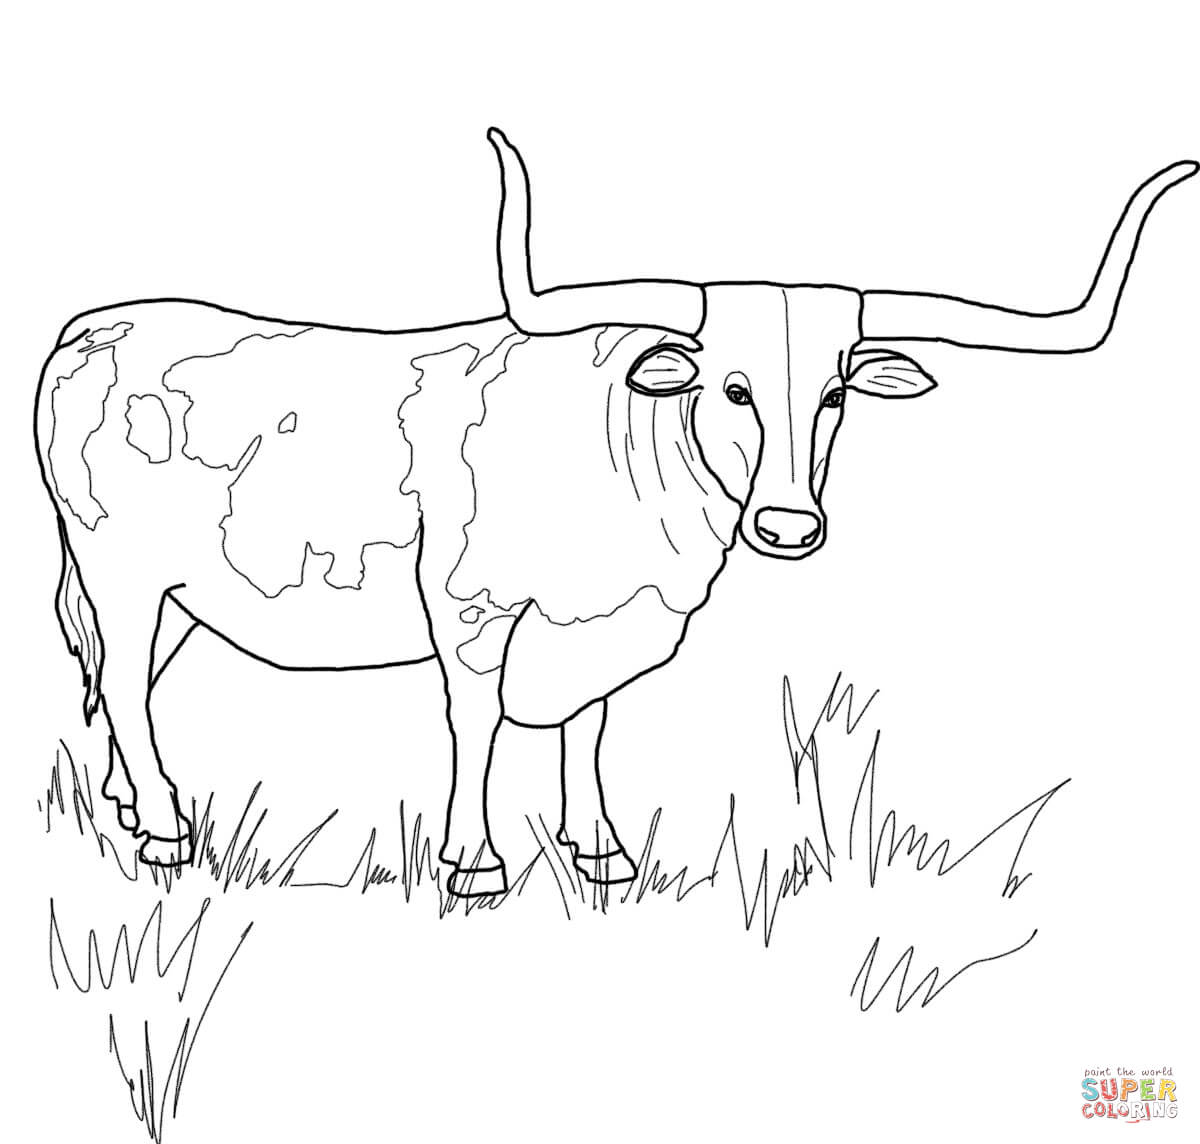 Longhorn coloring pages | Free Coloring Pages